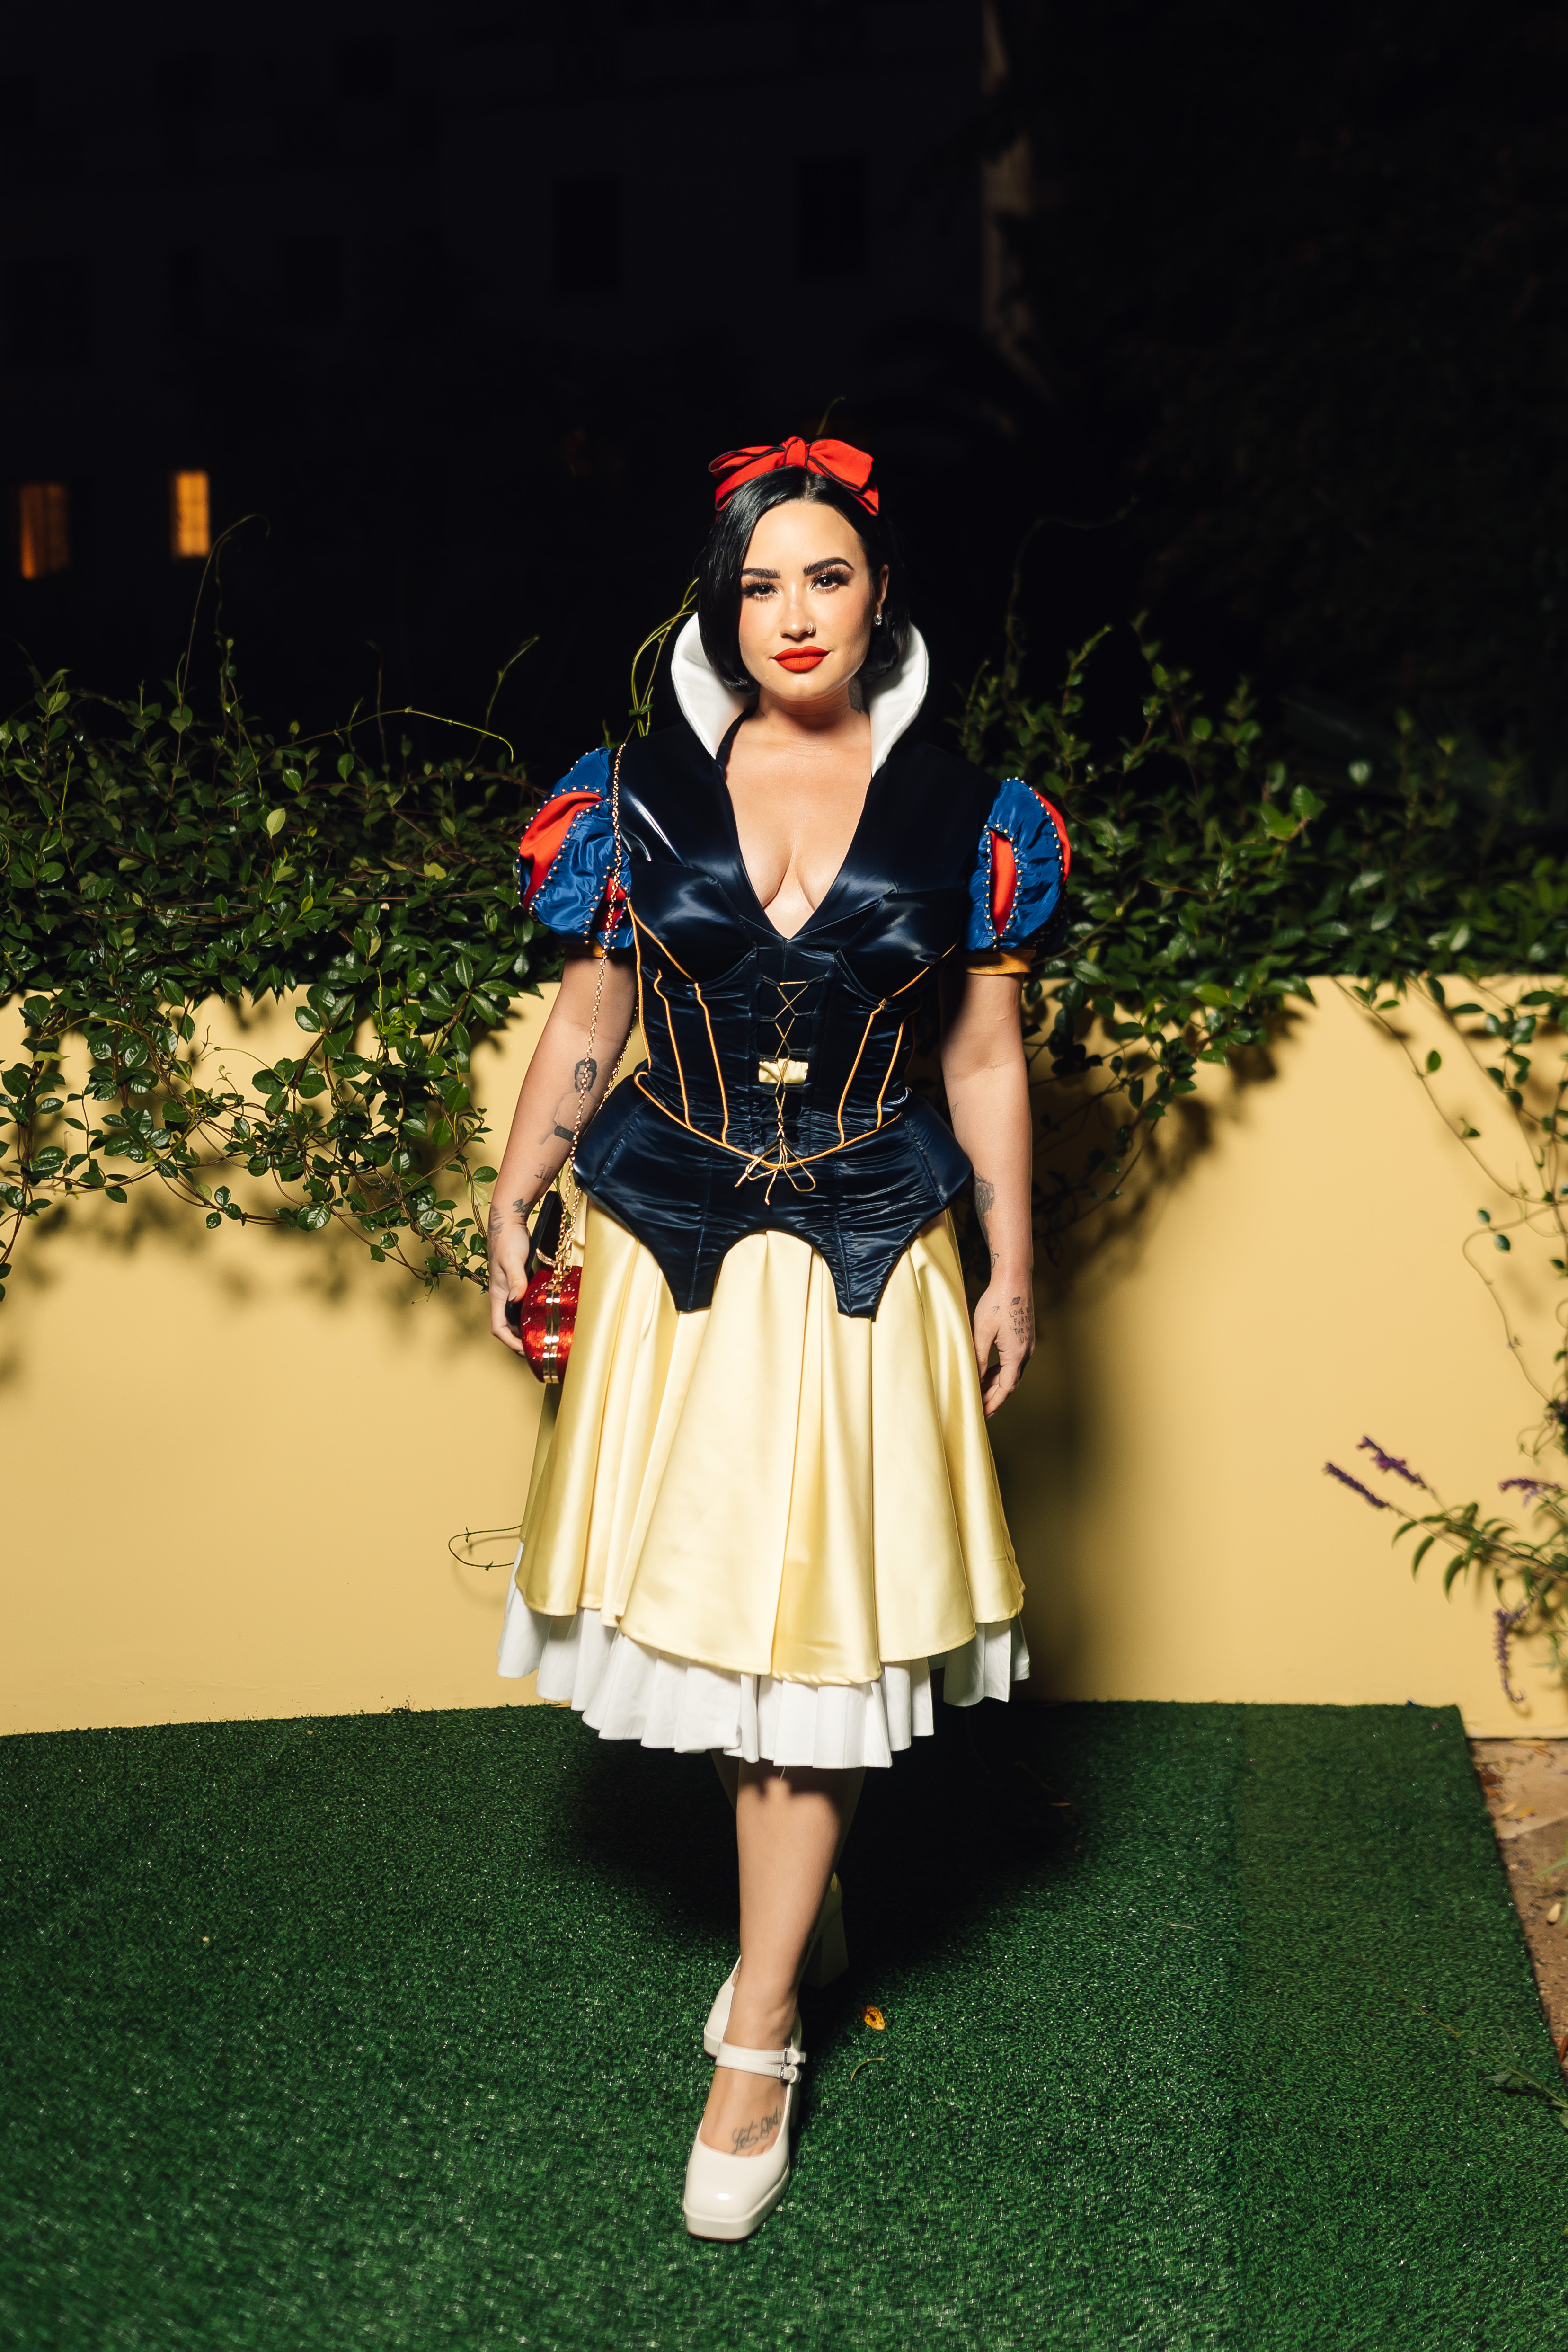 Demi Lovato is a classic channeling Snow White